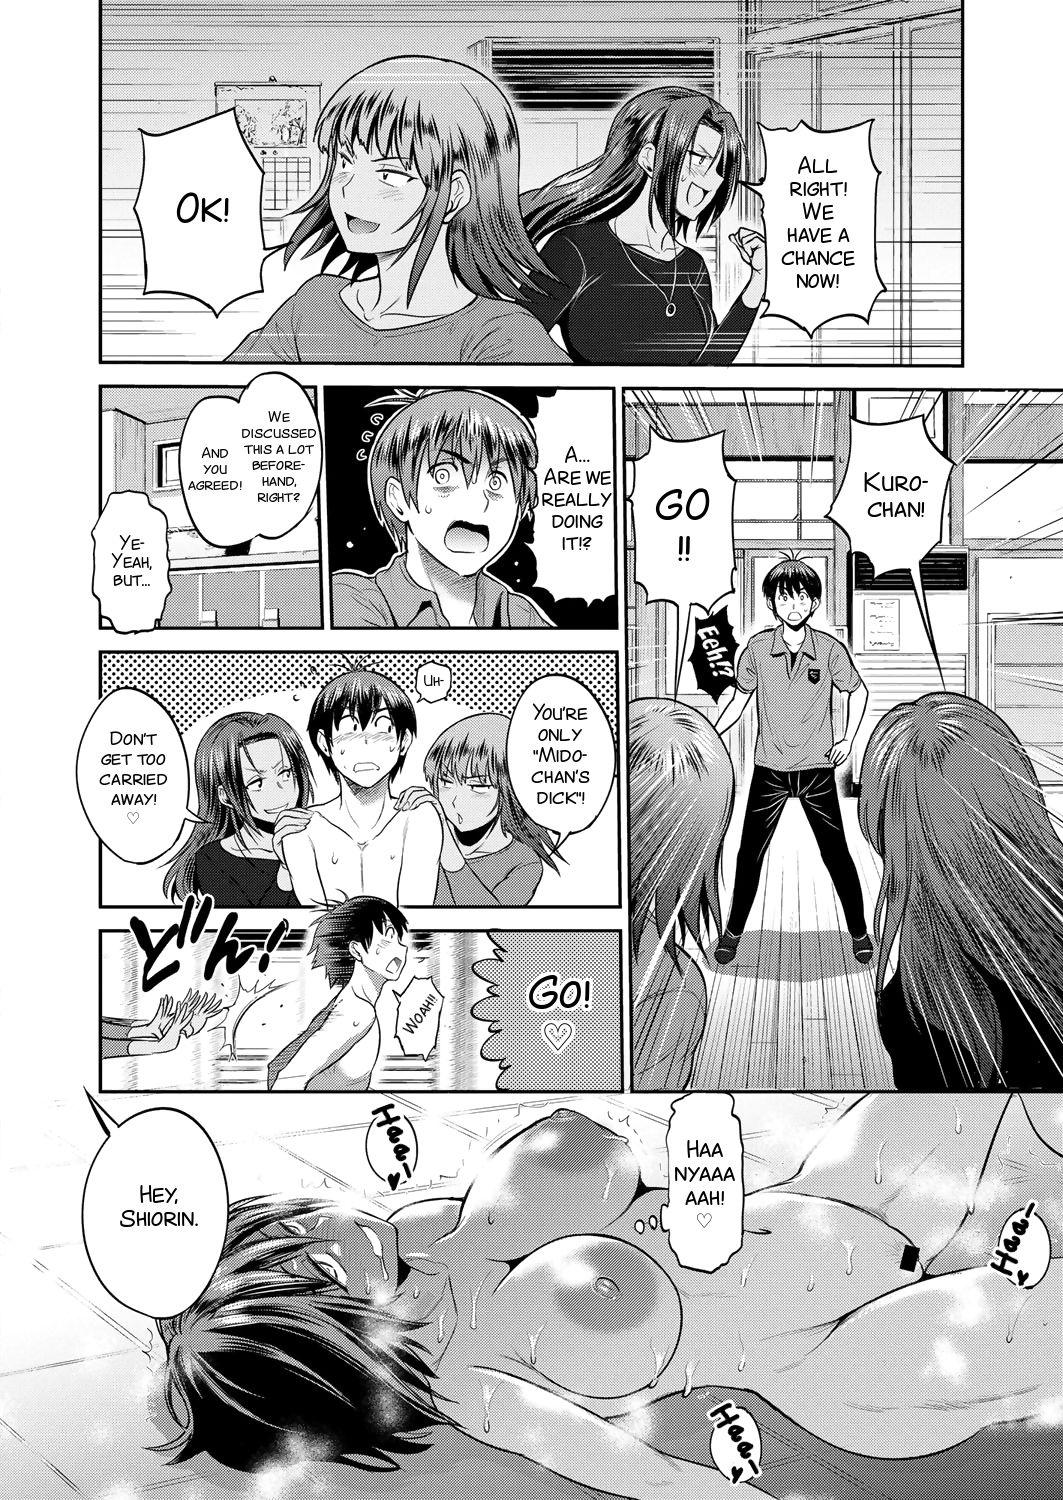 [DISTANCE] Joshi Luck! ~2 Years Later~ Ch. 7-8.5 [English] [SMDC] [Digital] 57